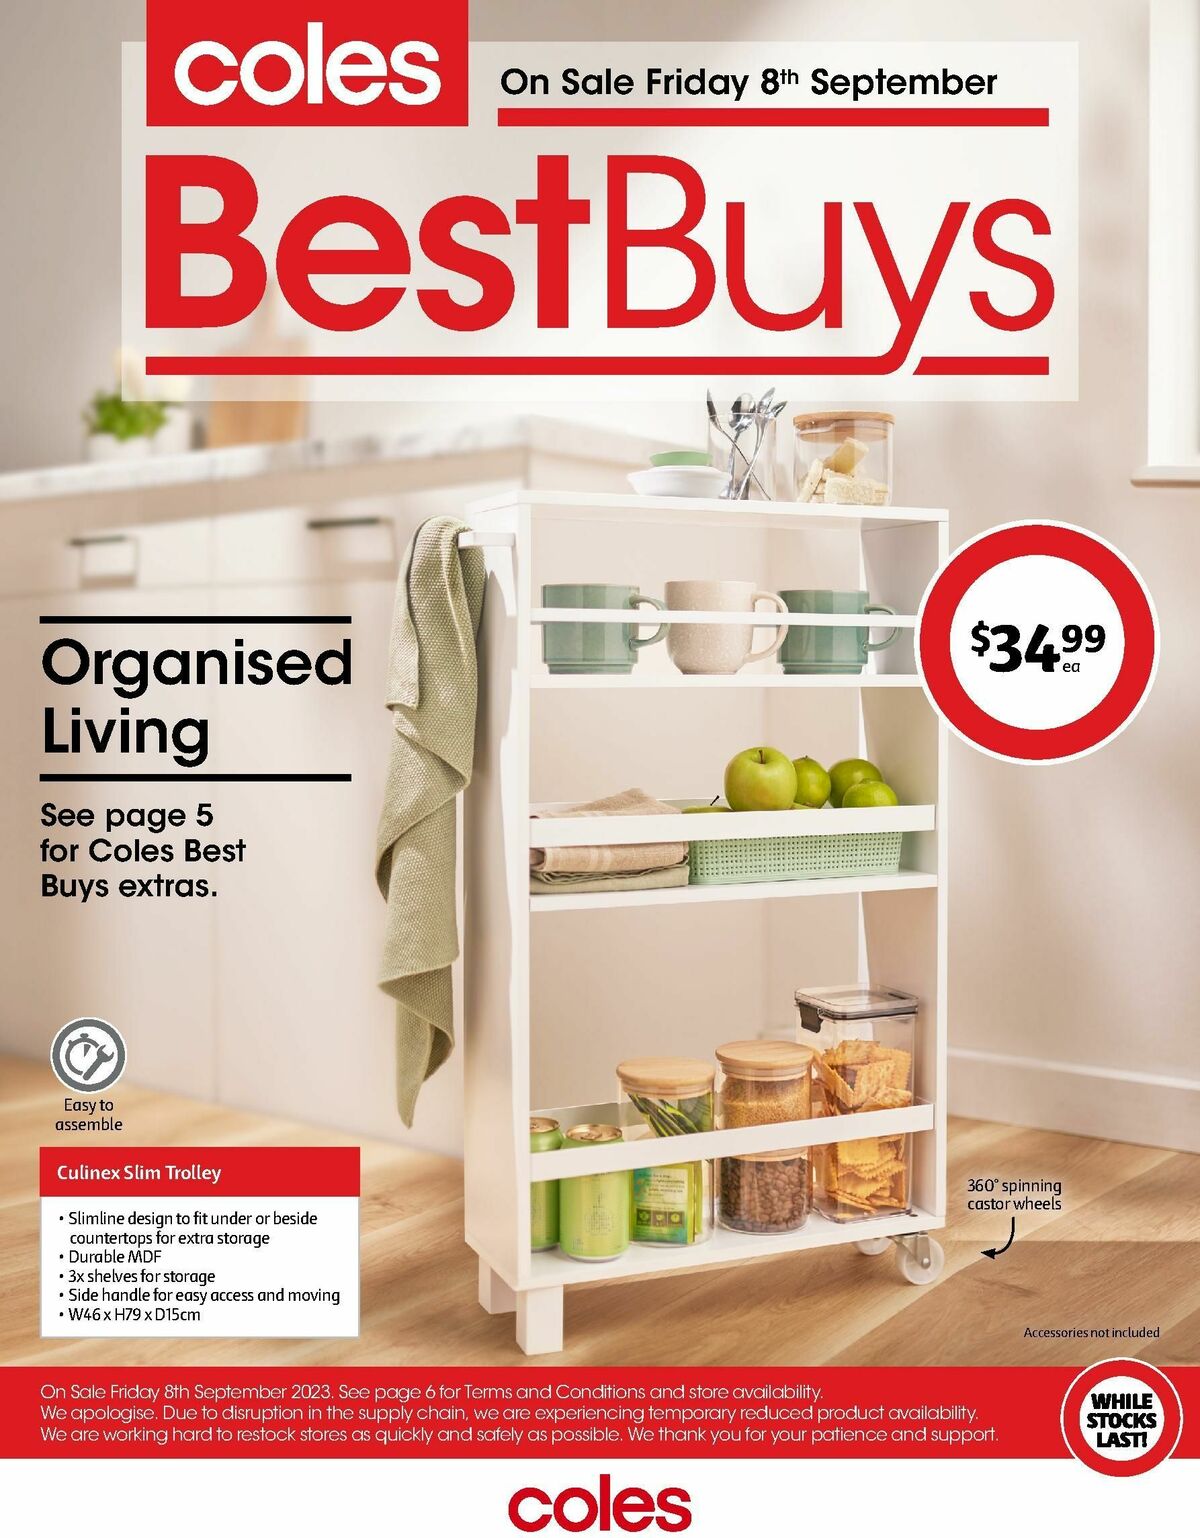 Coles Best Buys - Organised Living Catalogues from 8 September